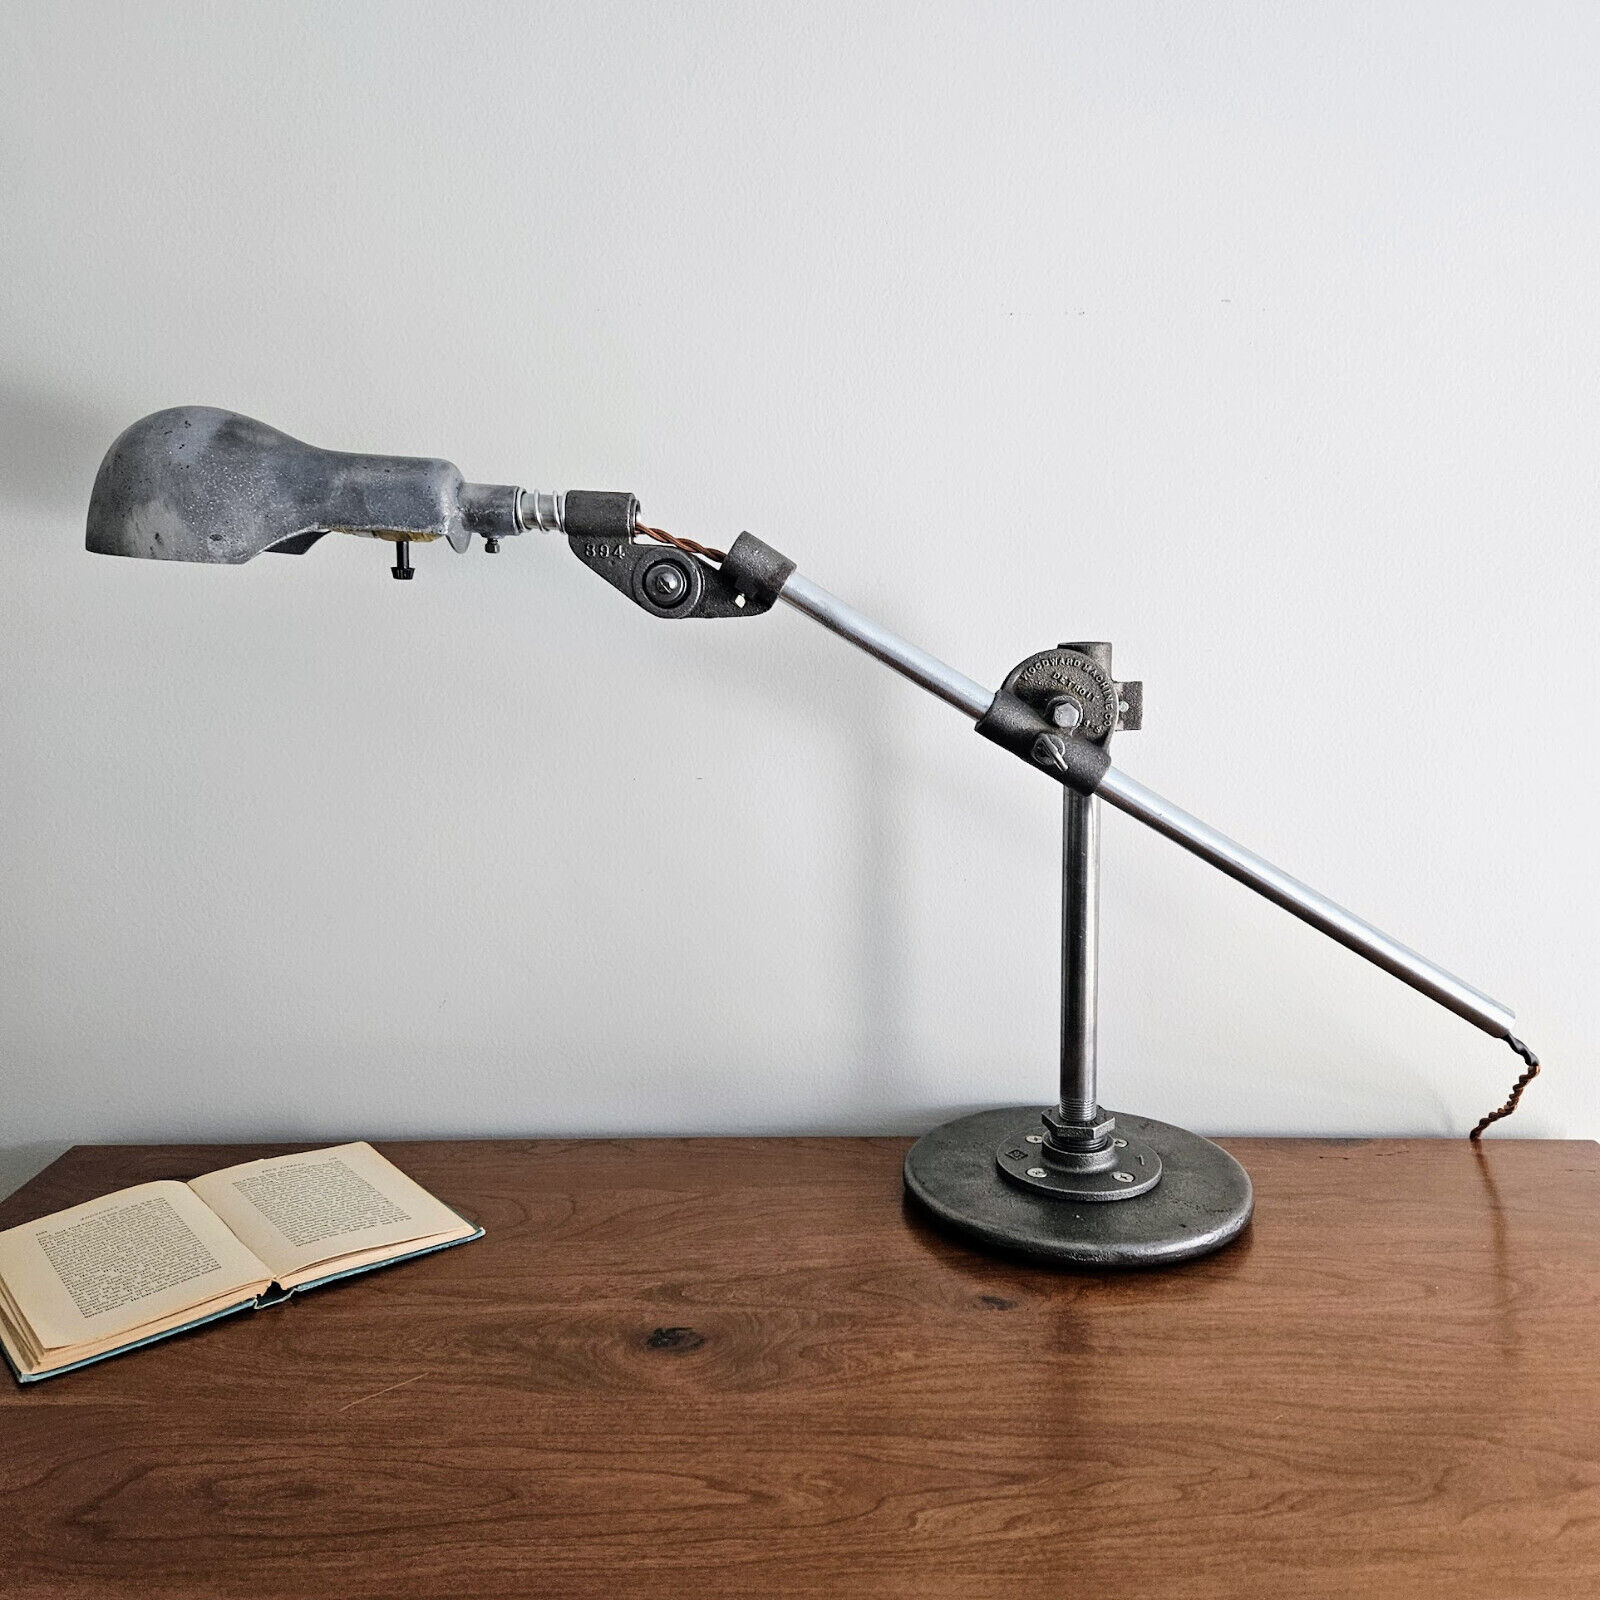 Vintage Industrial Desk Lamp. Woodward Industrial Lamp with Base.